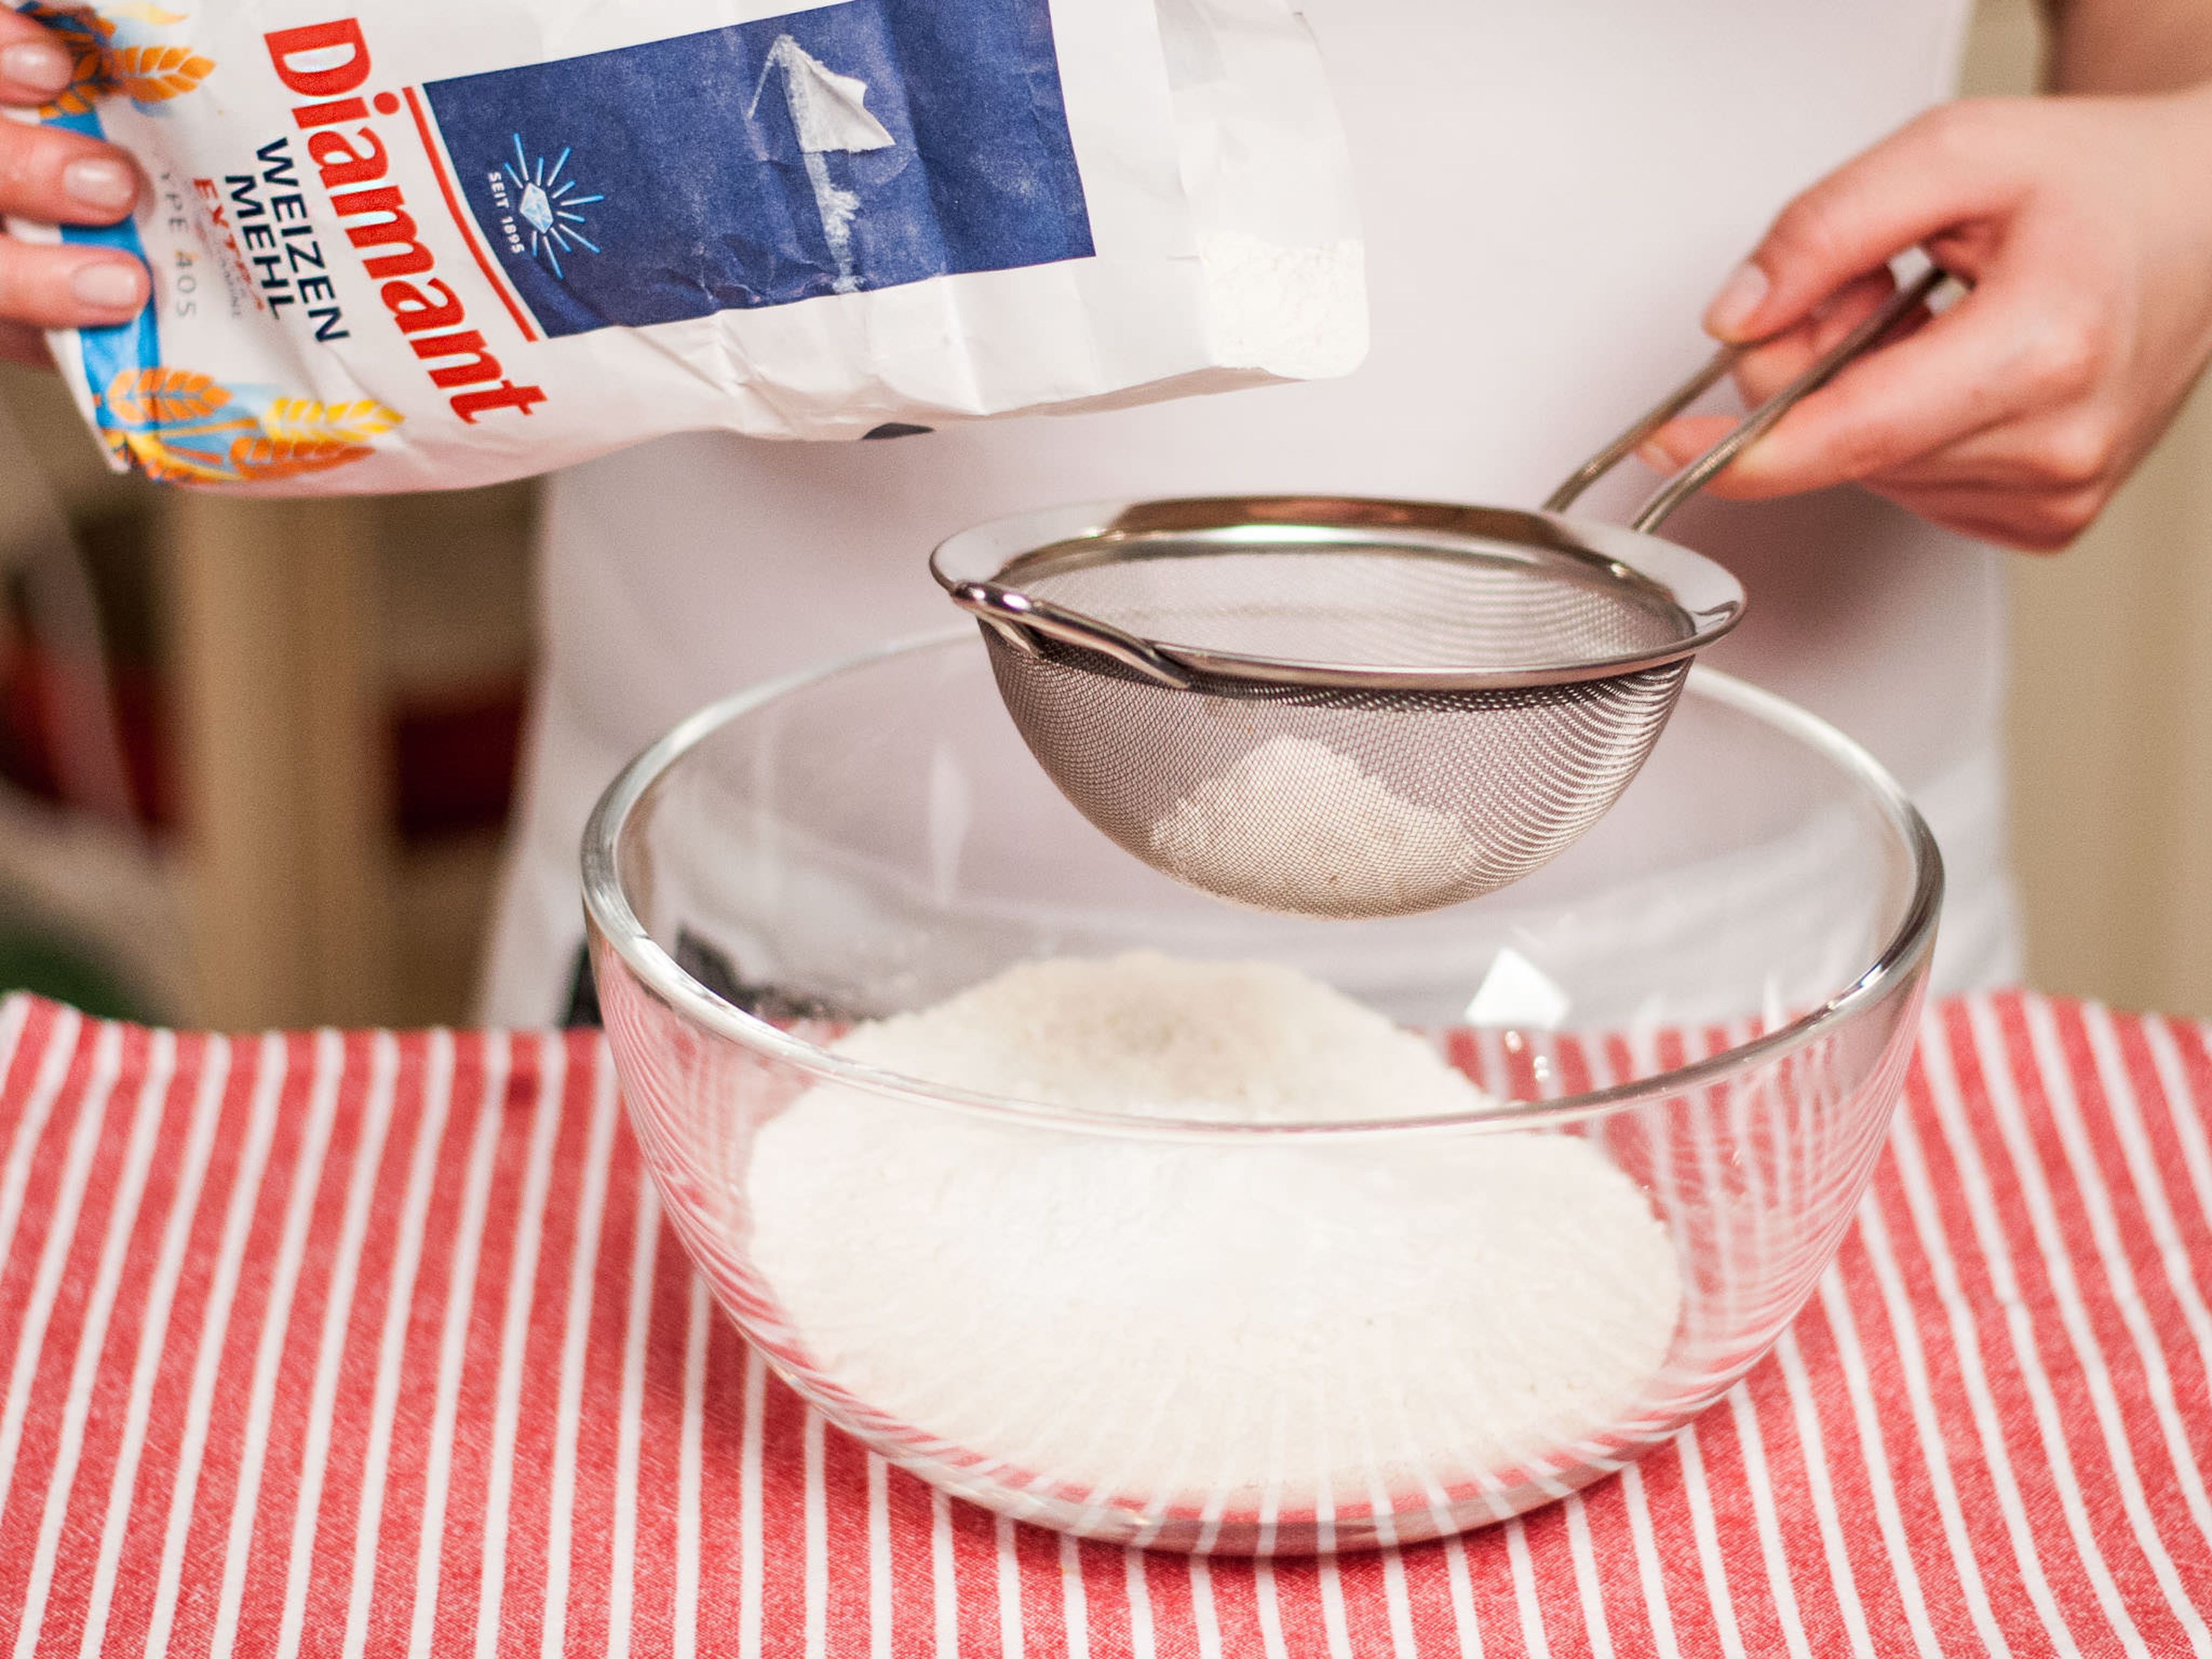 Sift flour, baking powder, and salt into separate bowl. Add to butter mixture and whisk until a smooth dough forms.